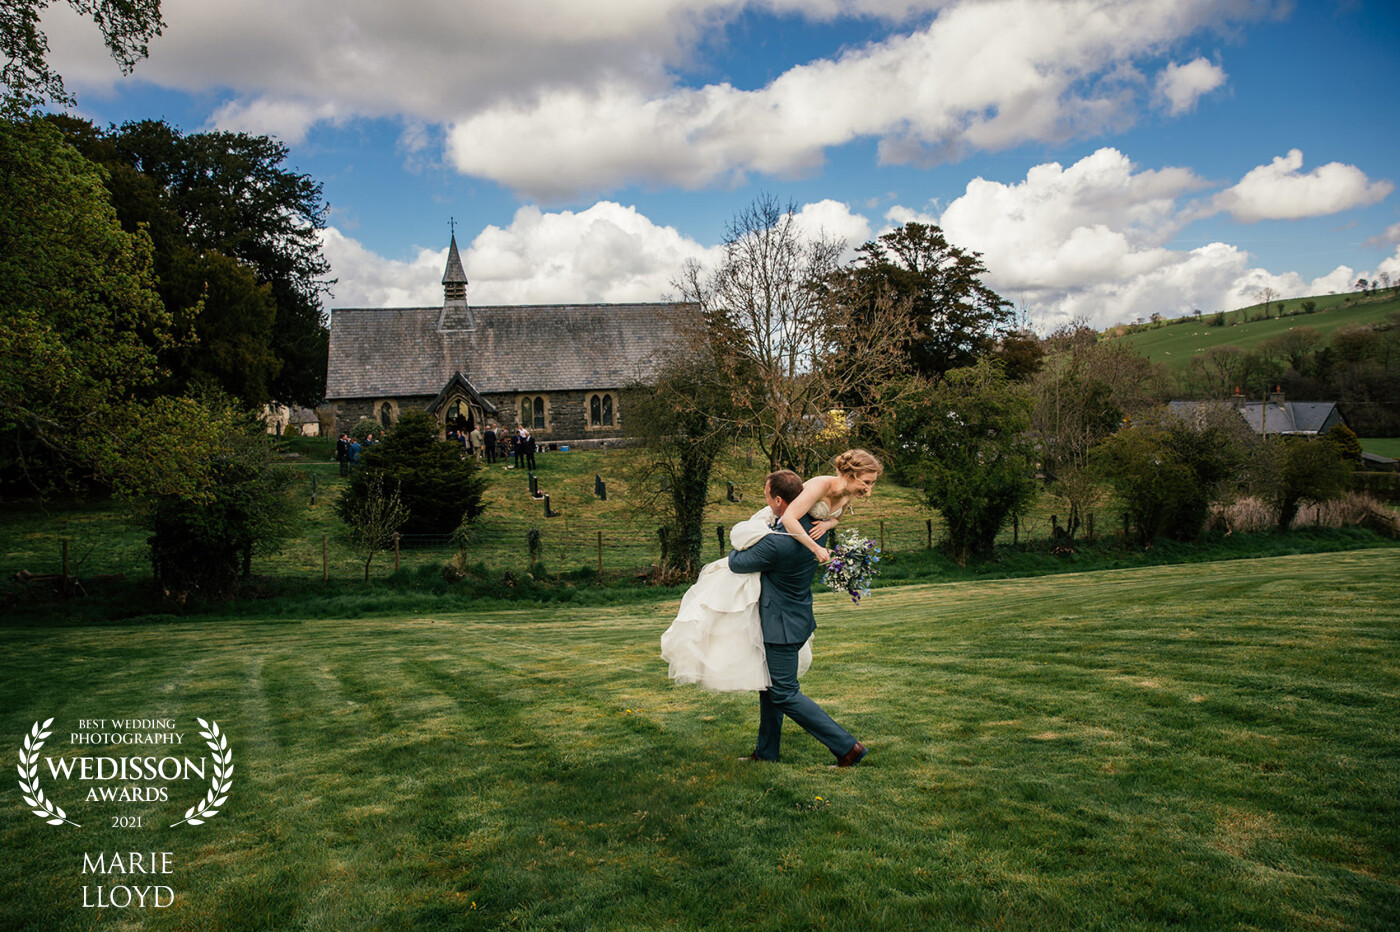 A very candid moment. The Brides shoes were sinking into the grass, so her Groom offered her some help. The image features their church in the background.